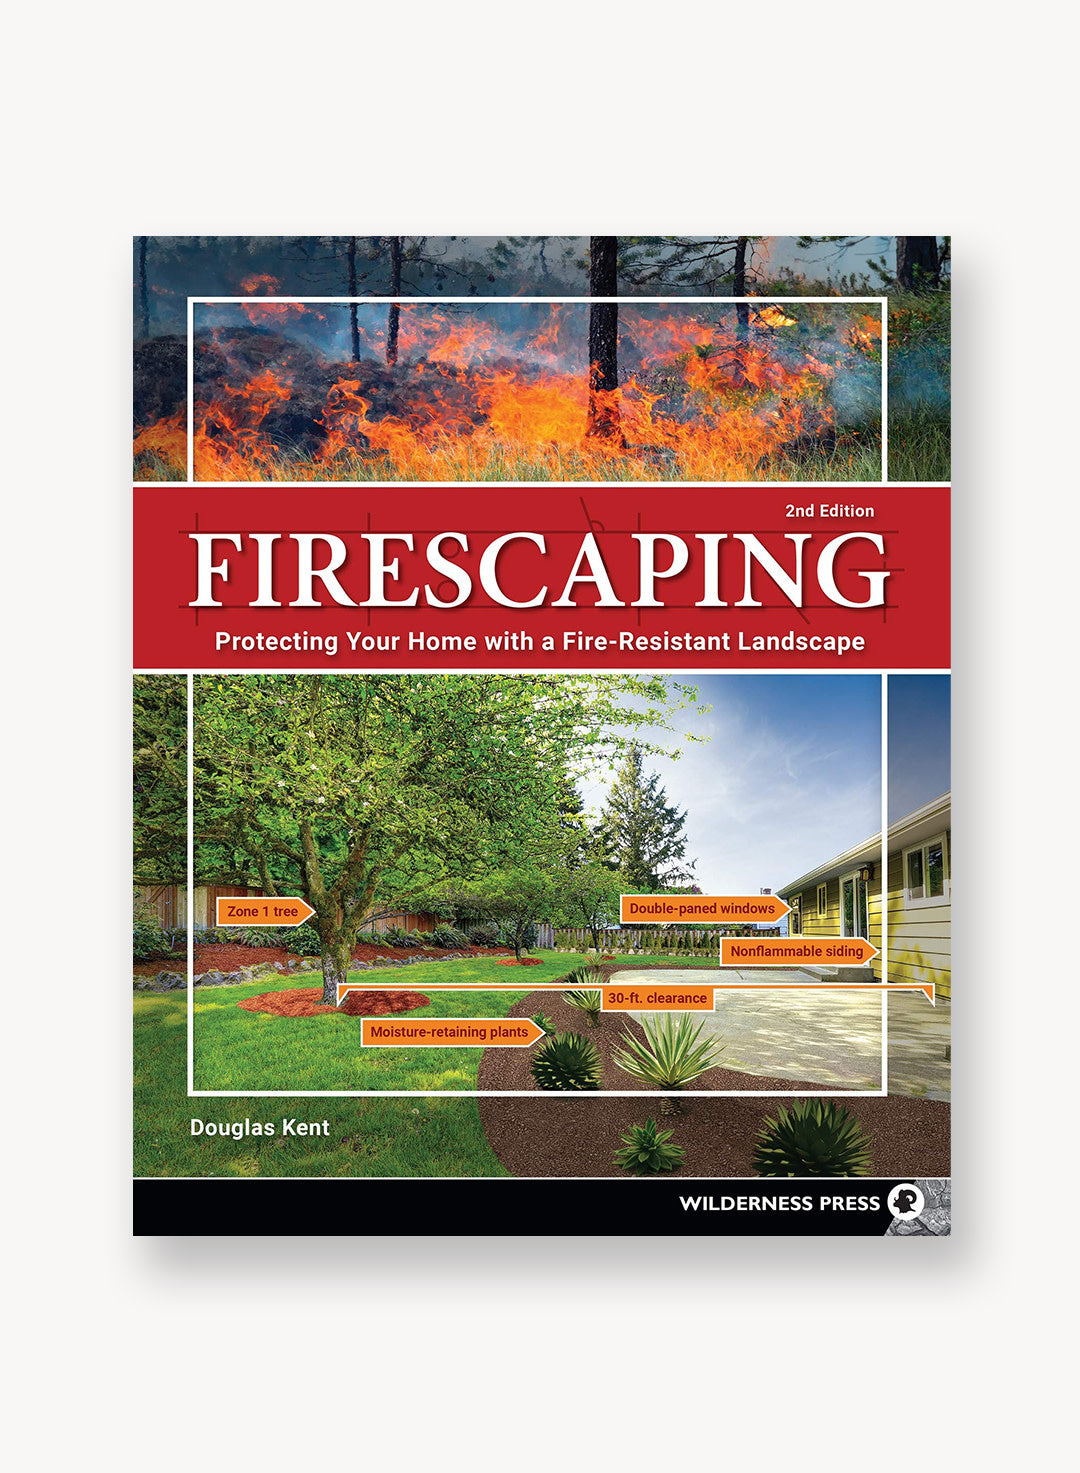 firescaping-protecting-your-home-with-a-fire-resis.jpg